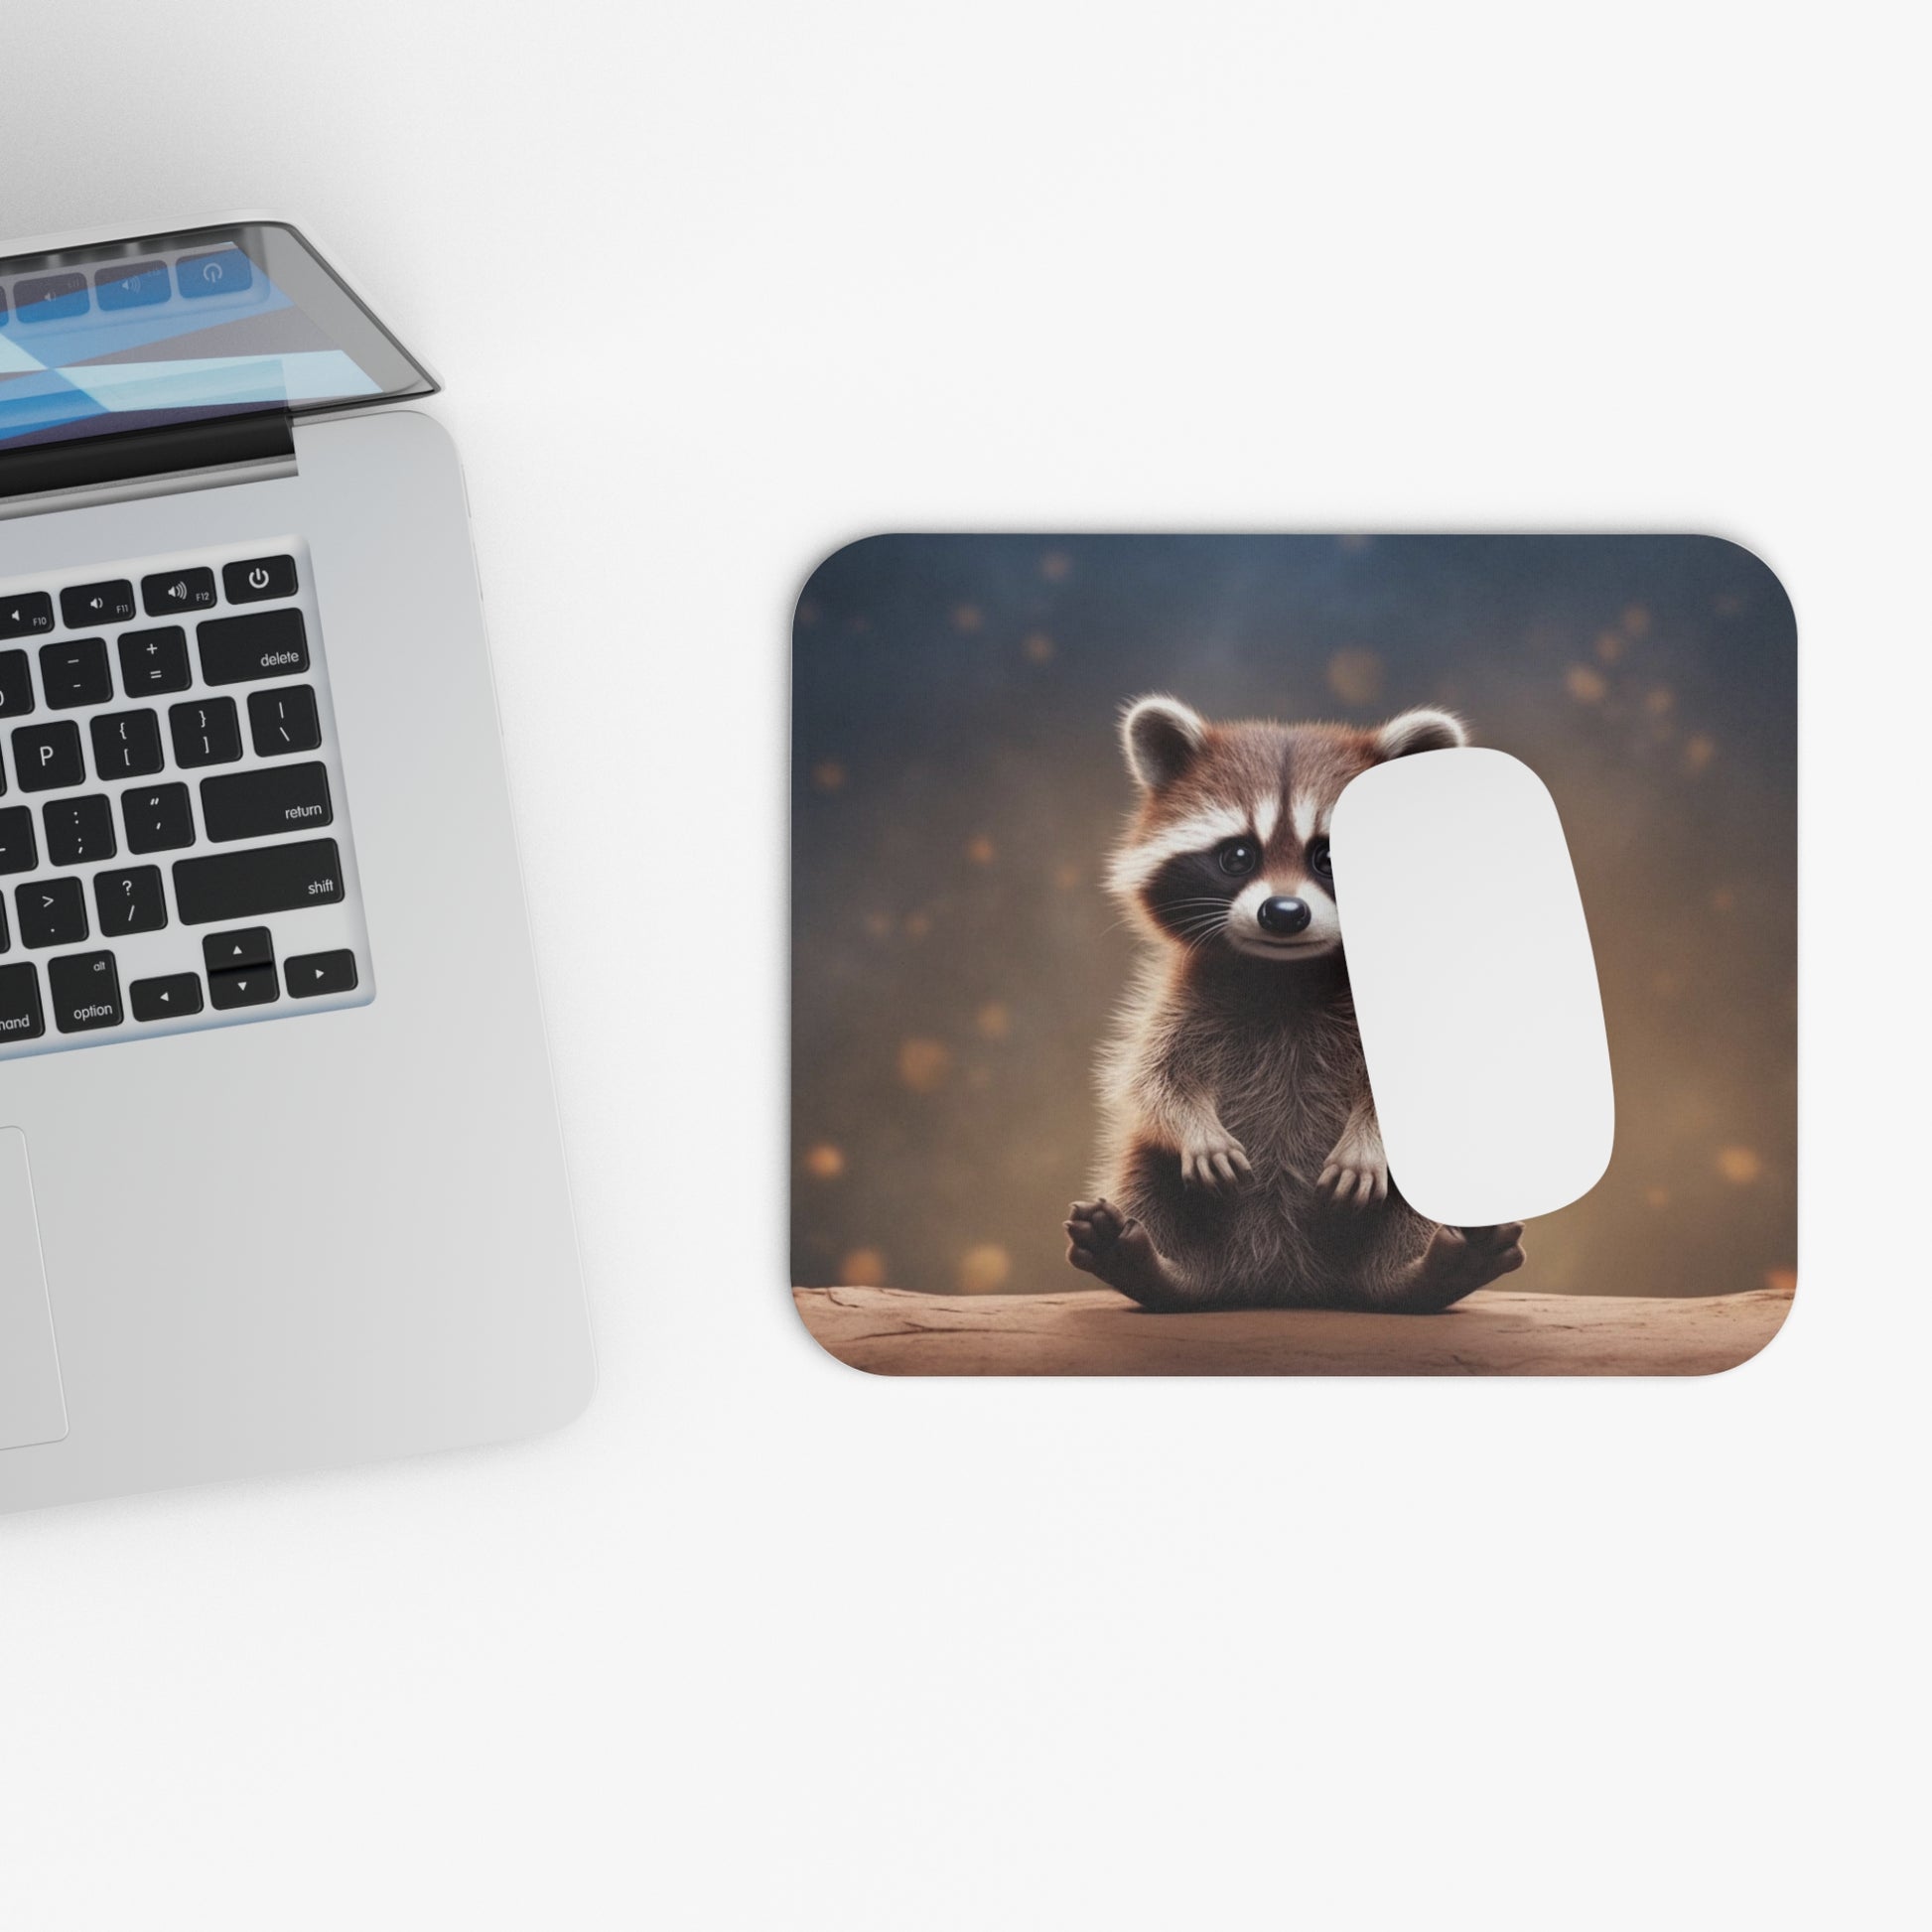 Cute Raccoon Mouse Pad, Animal Computer Gaming Unique Desk Cool Decorative Aesthetic Design Square Mat Starcove Fashion